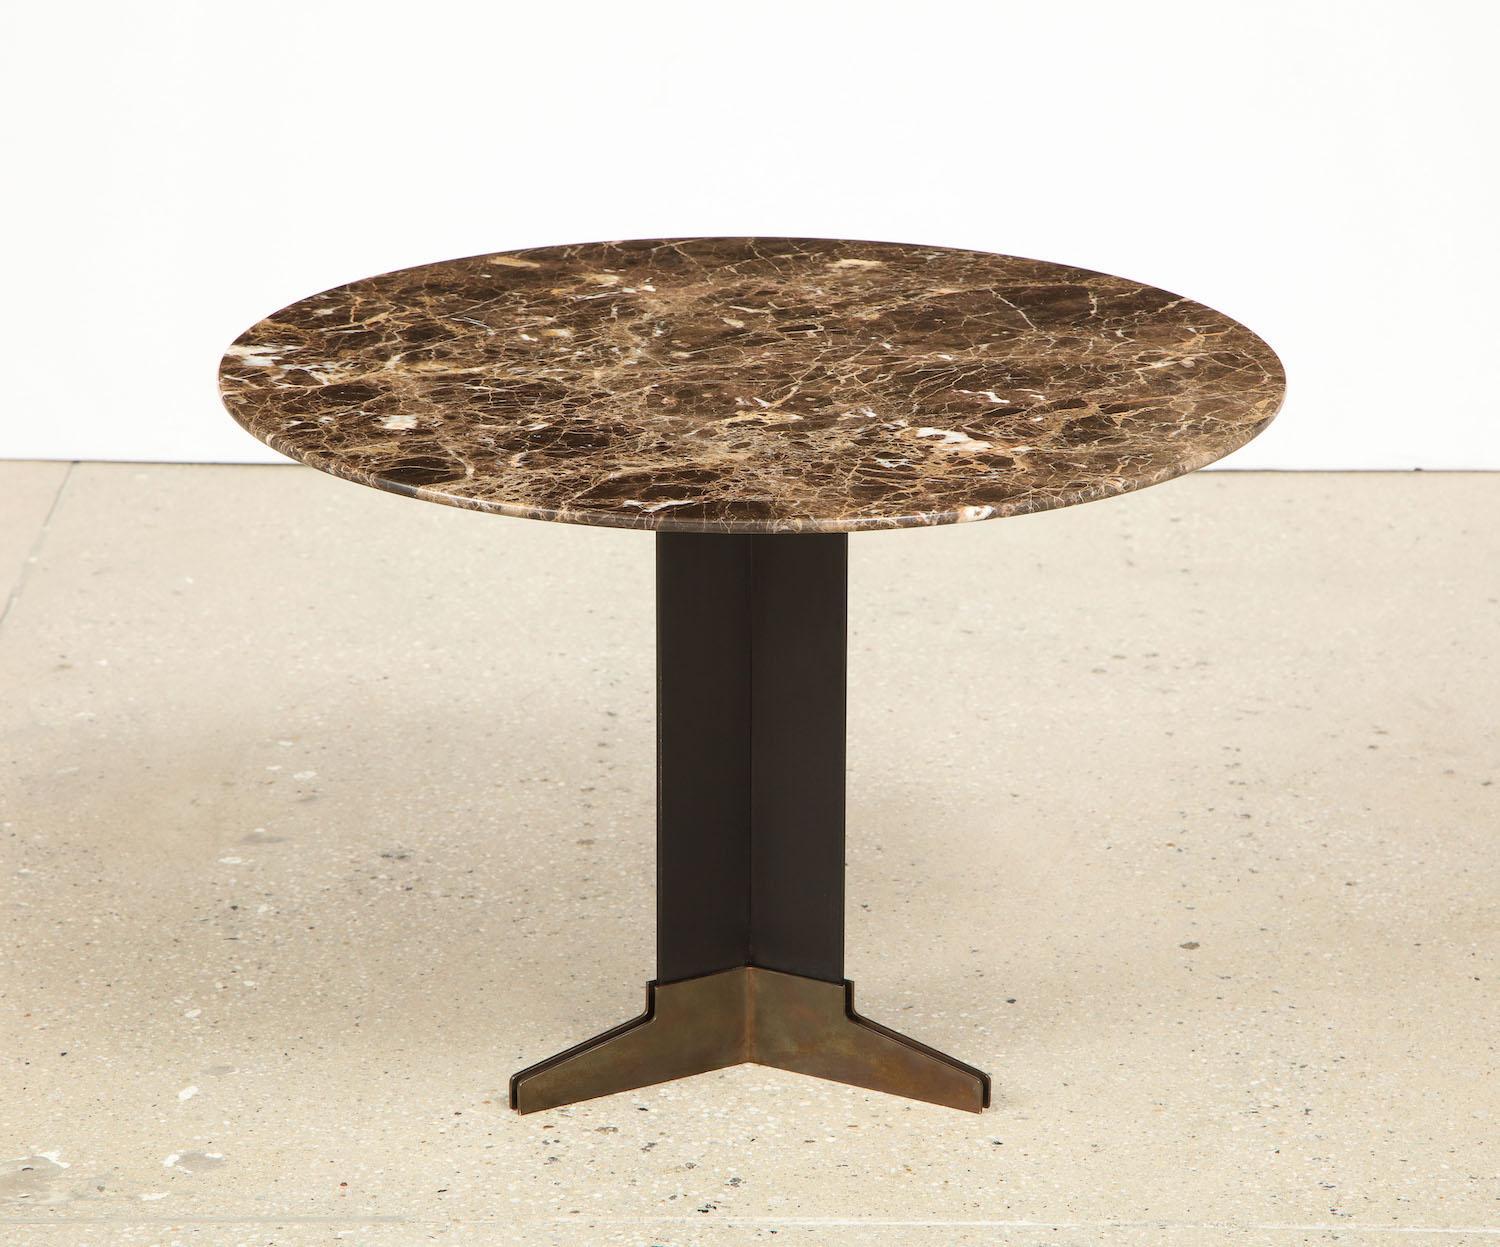 Painted iron, oxidized brass, marble. Fantastic architectural side table in very good condition.